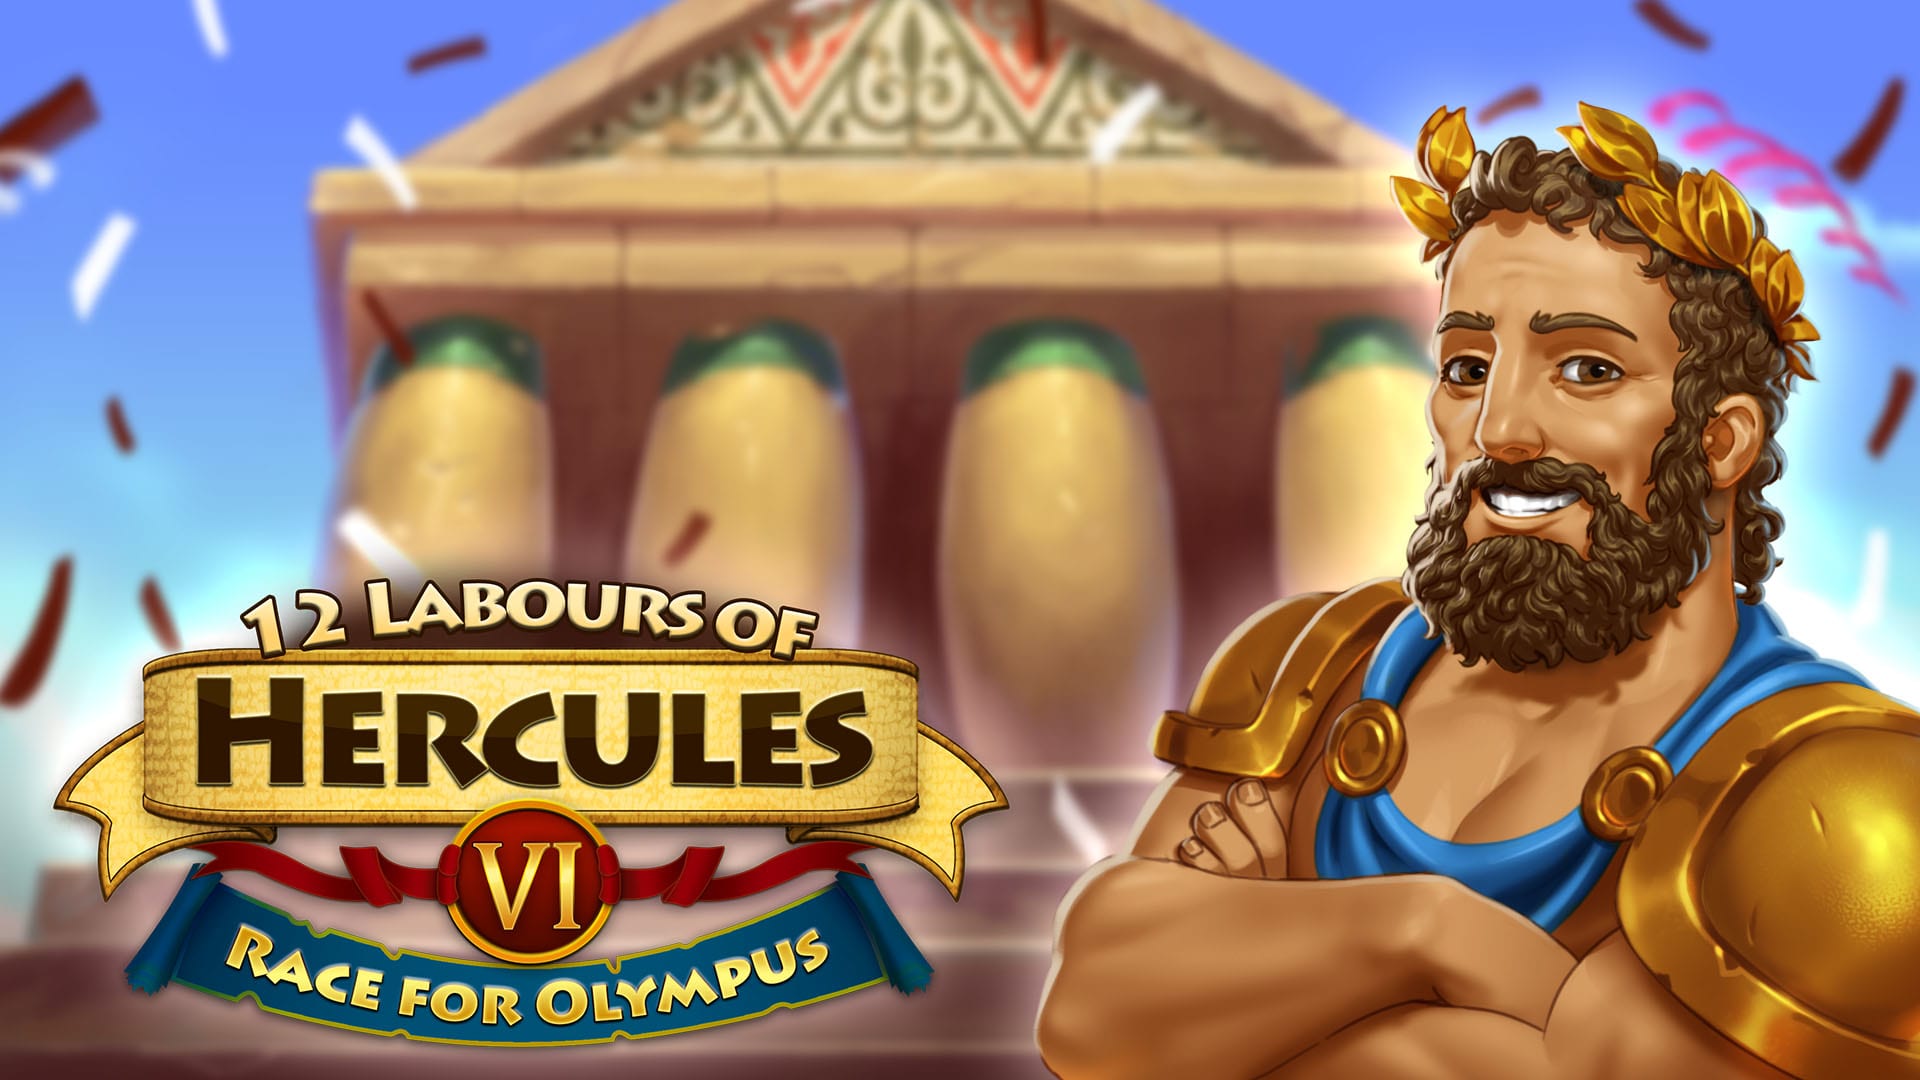 12 Labours of Hercules VI: Race for Olympus 1